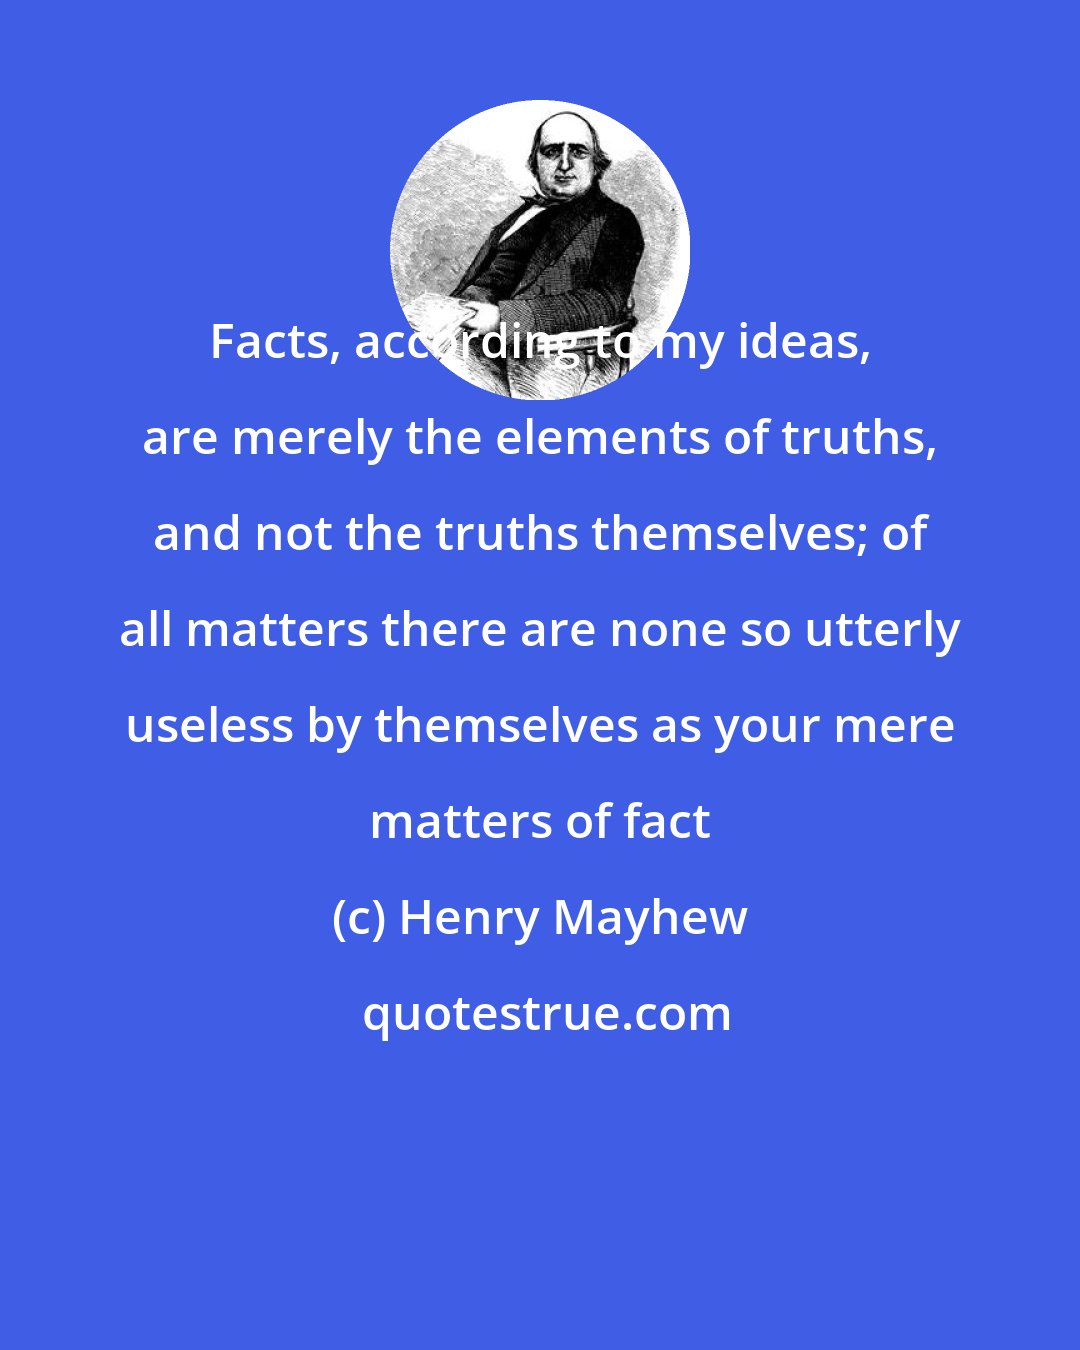 Henry Mayhew: Facts, according to my ideas, are merely the elements of truths, and not the truths themselves; of all matters there are none so utterly useless by themselves as your mere matters of fact